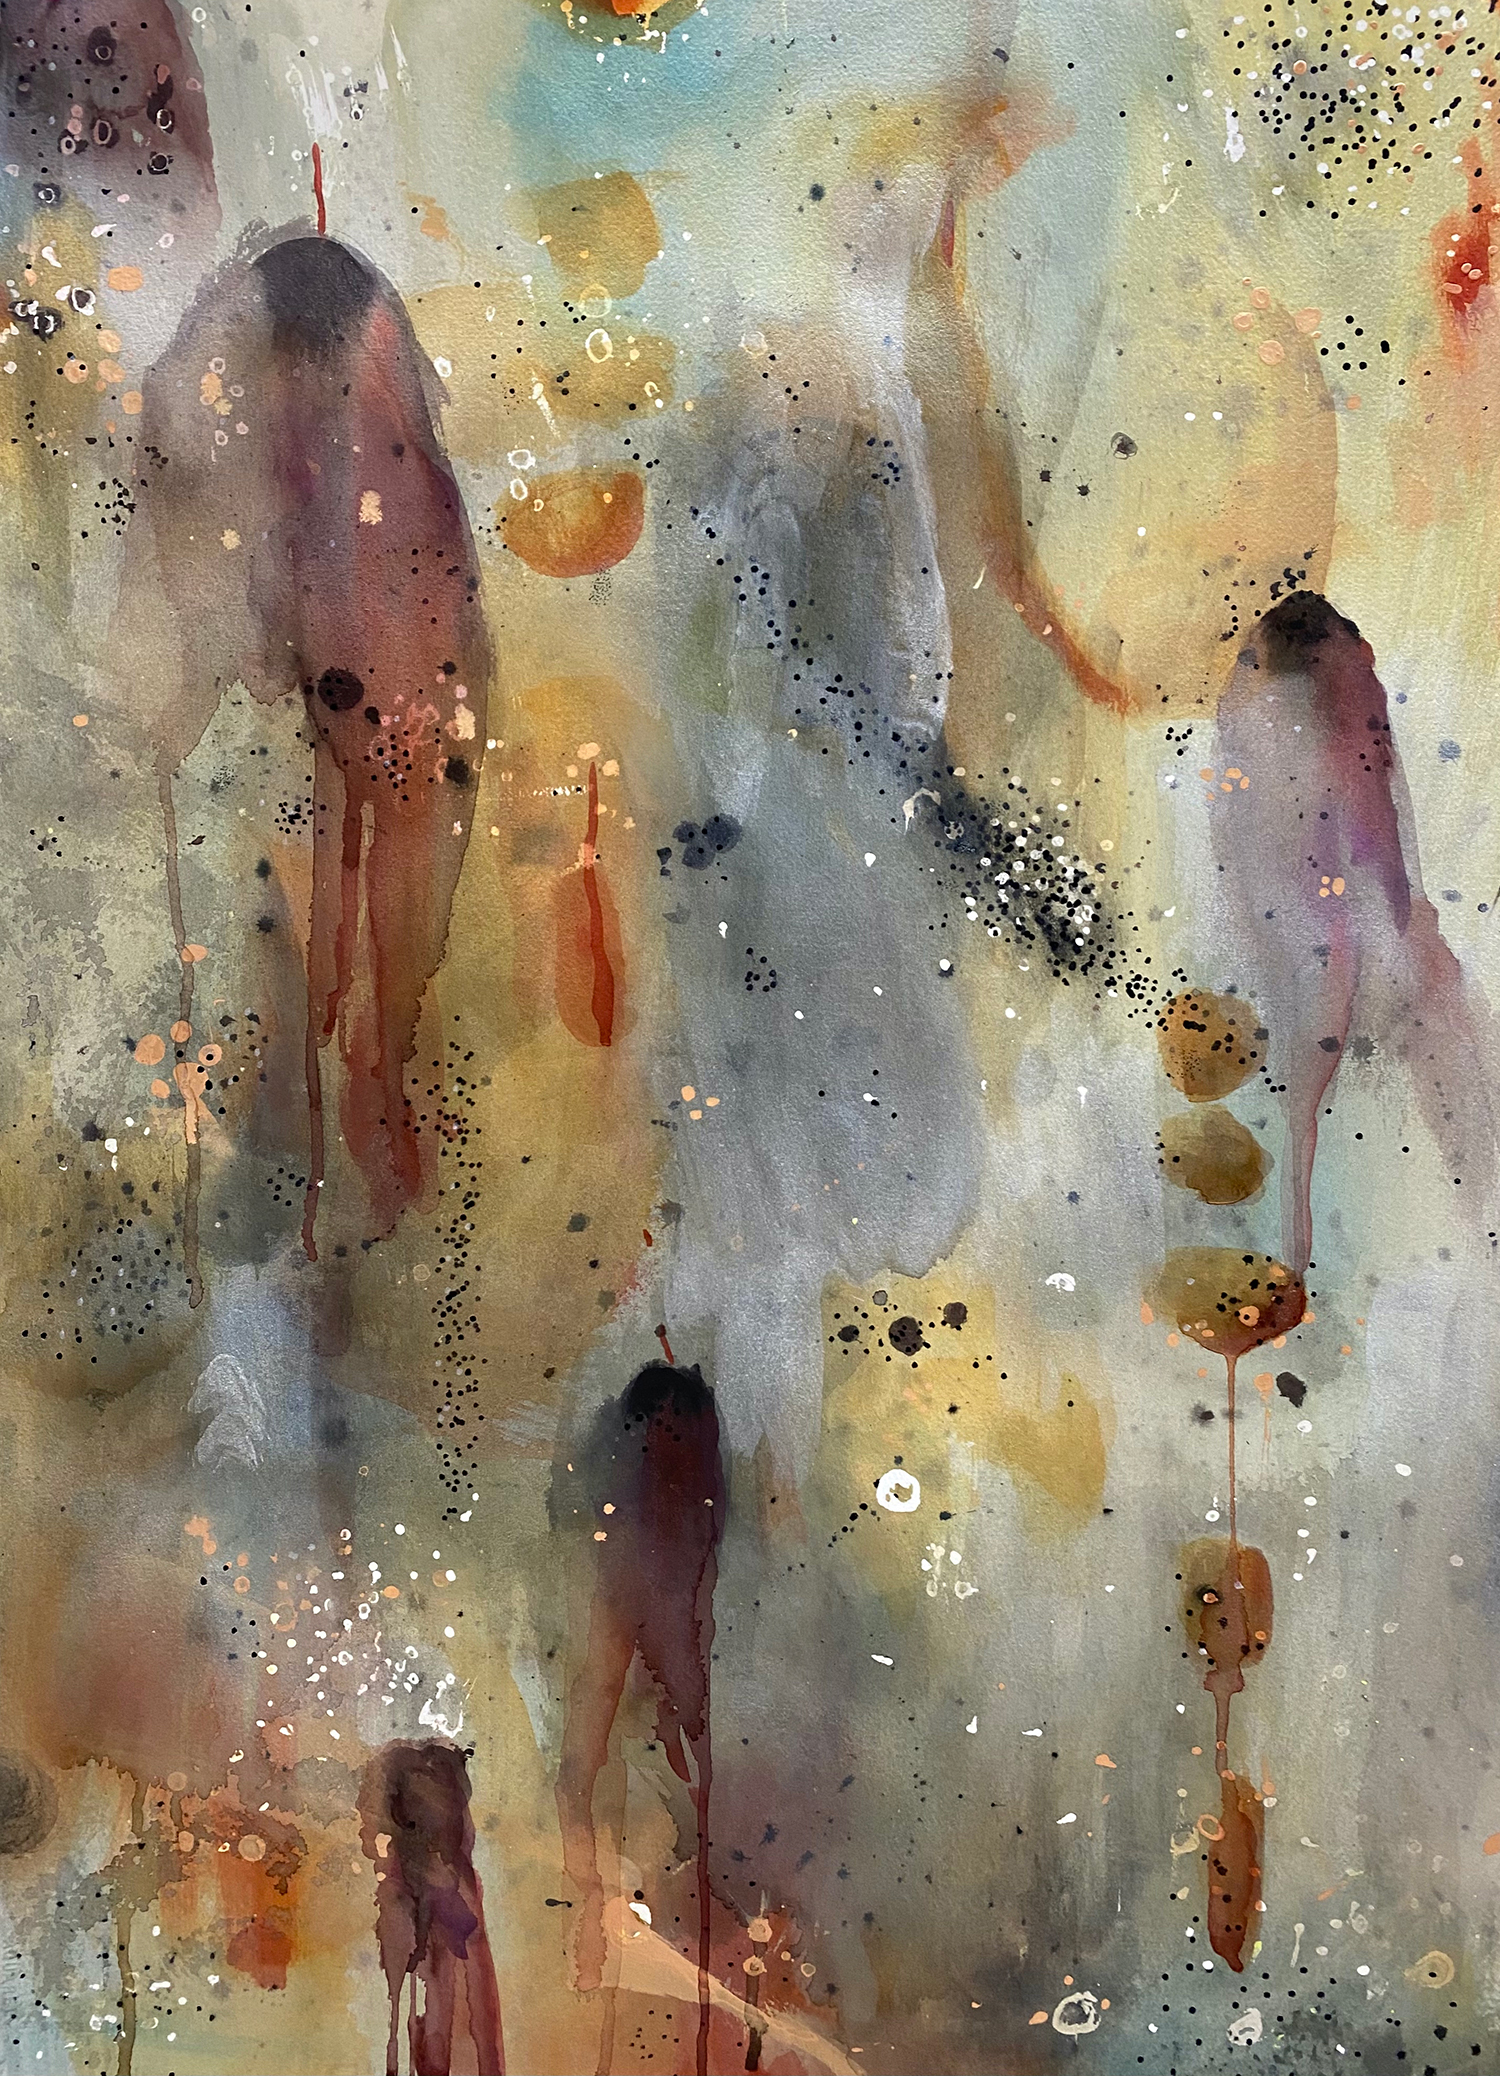 "Abstract rendition of the Poplar Borer’s appearance and exit holes. Light background with orange and black shapes to represent the appearance of Poplar Borers; red dripping areas to mimic the holes they leave as they exit trees."